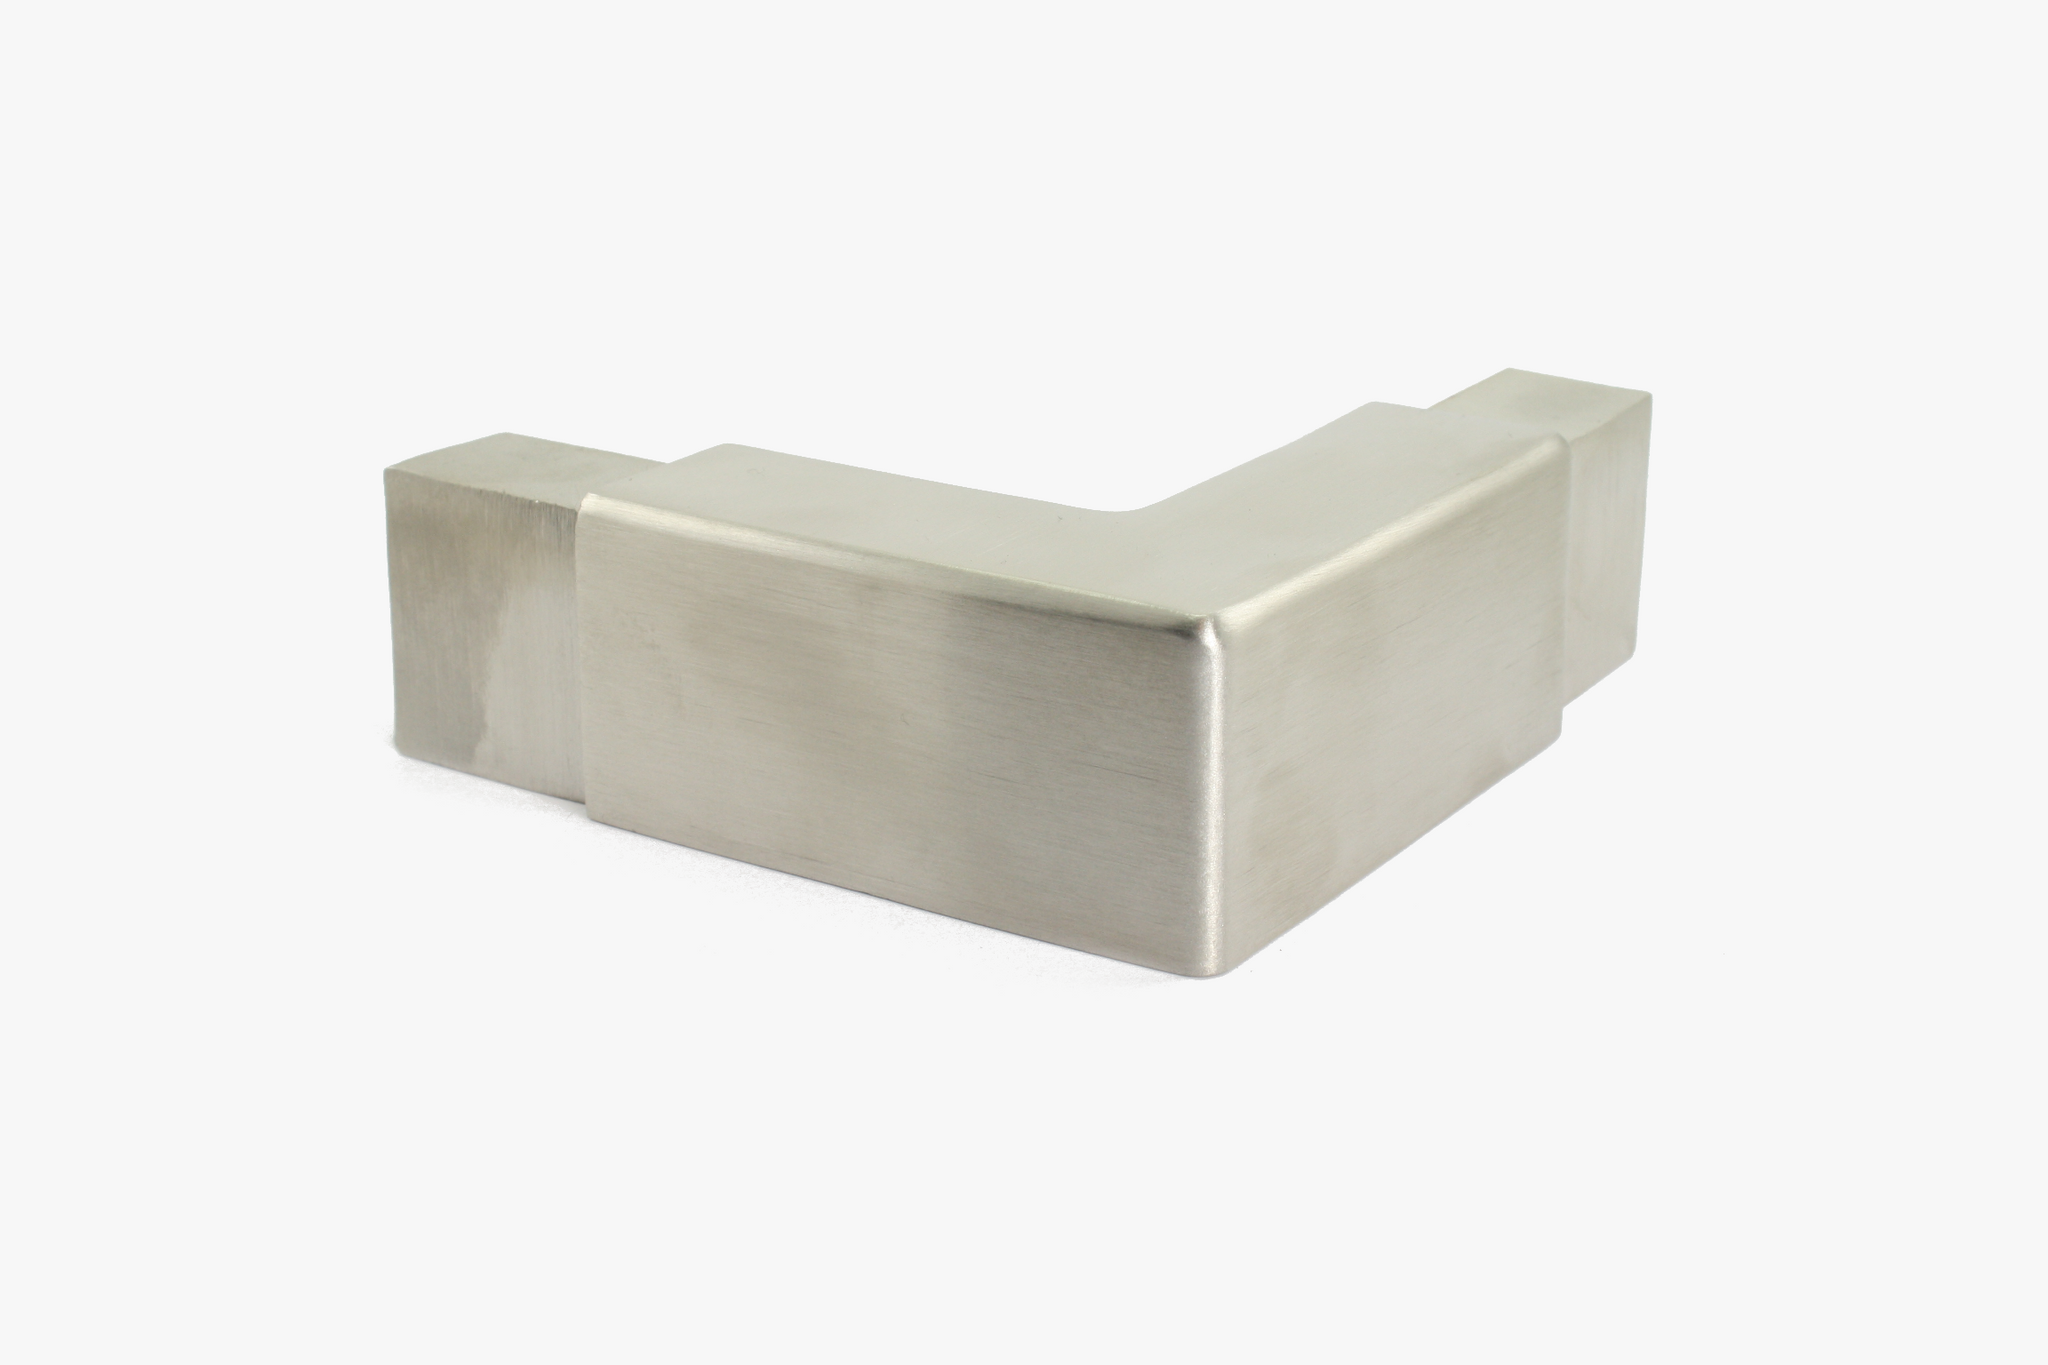 90 degree horizontal elbow for 20mm structural top cap - Brushed stainless steel